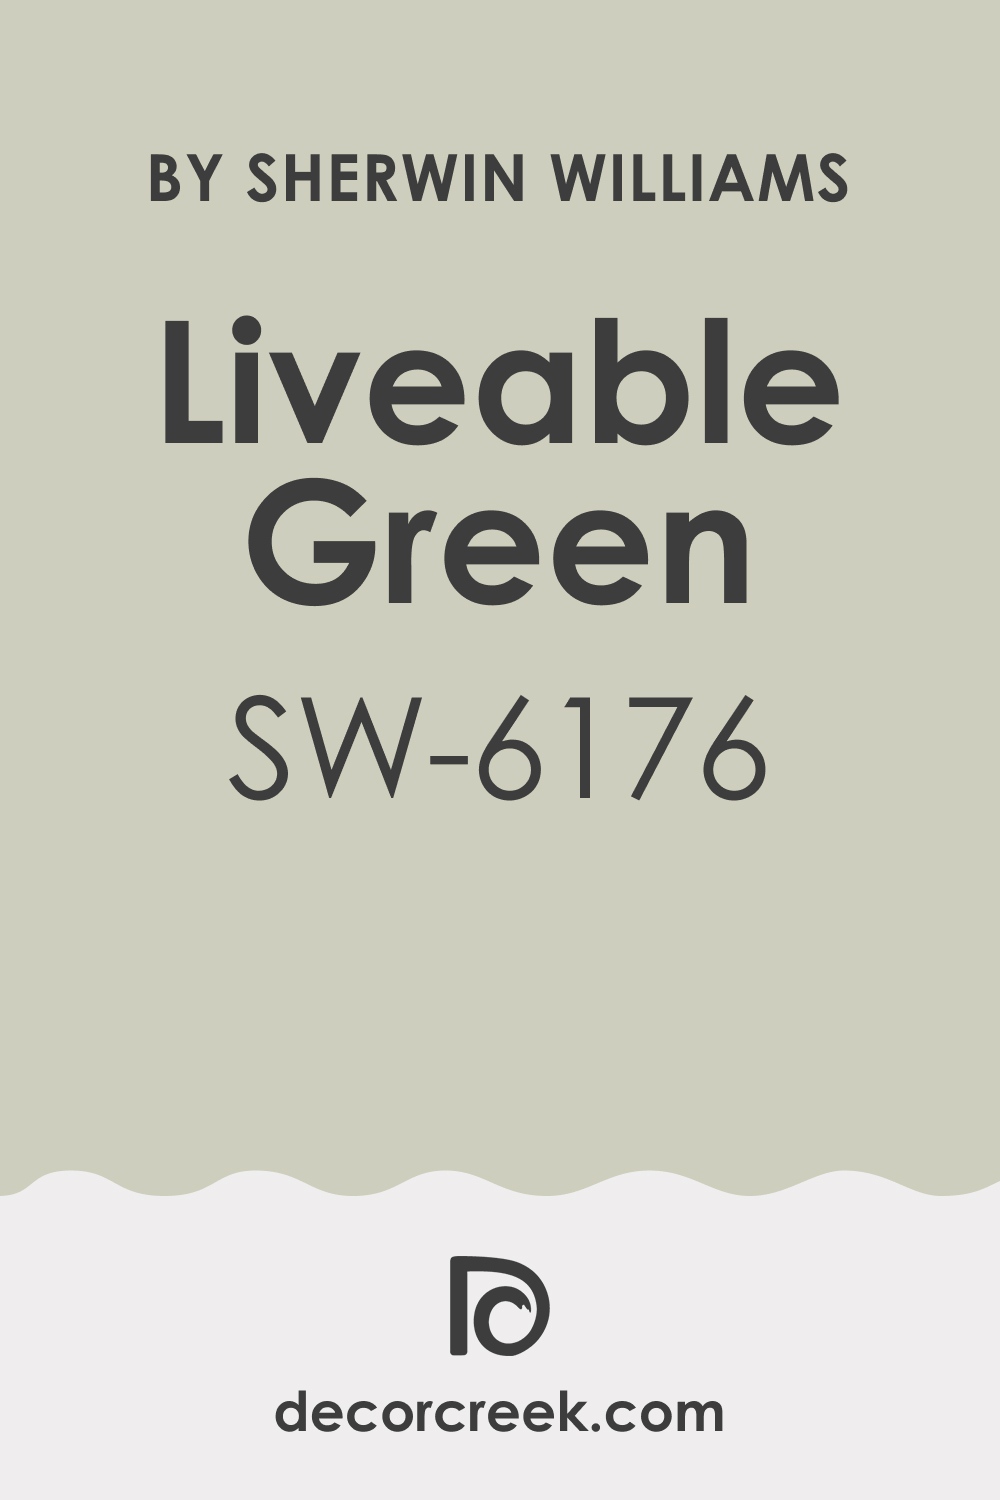 What Kind of Green Color Is Liveable Green SW 6176?